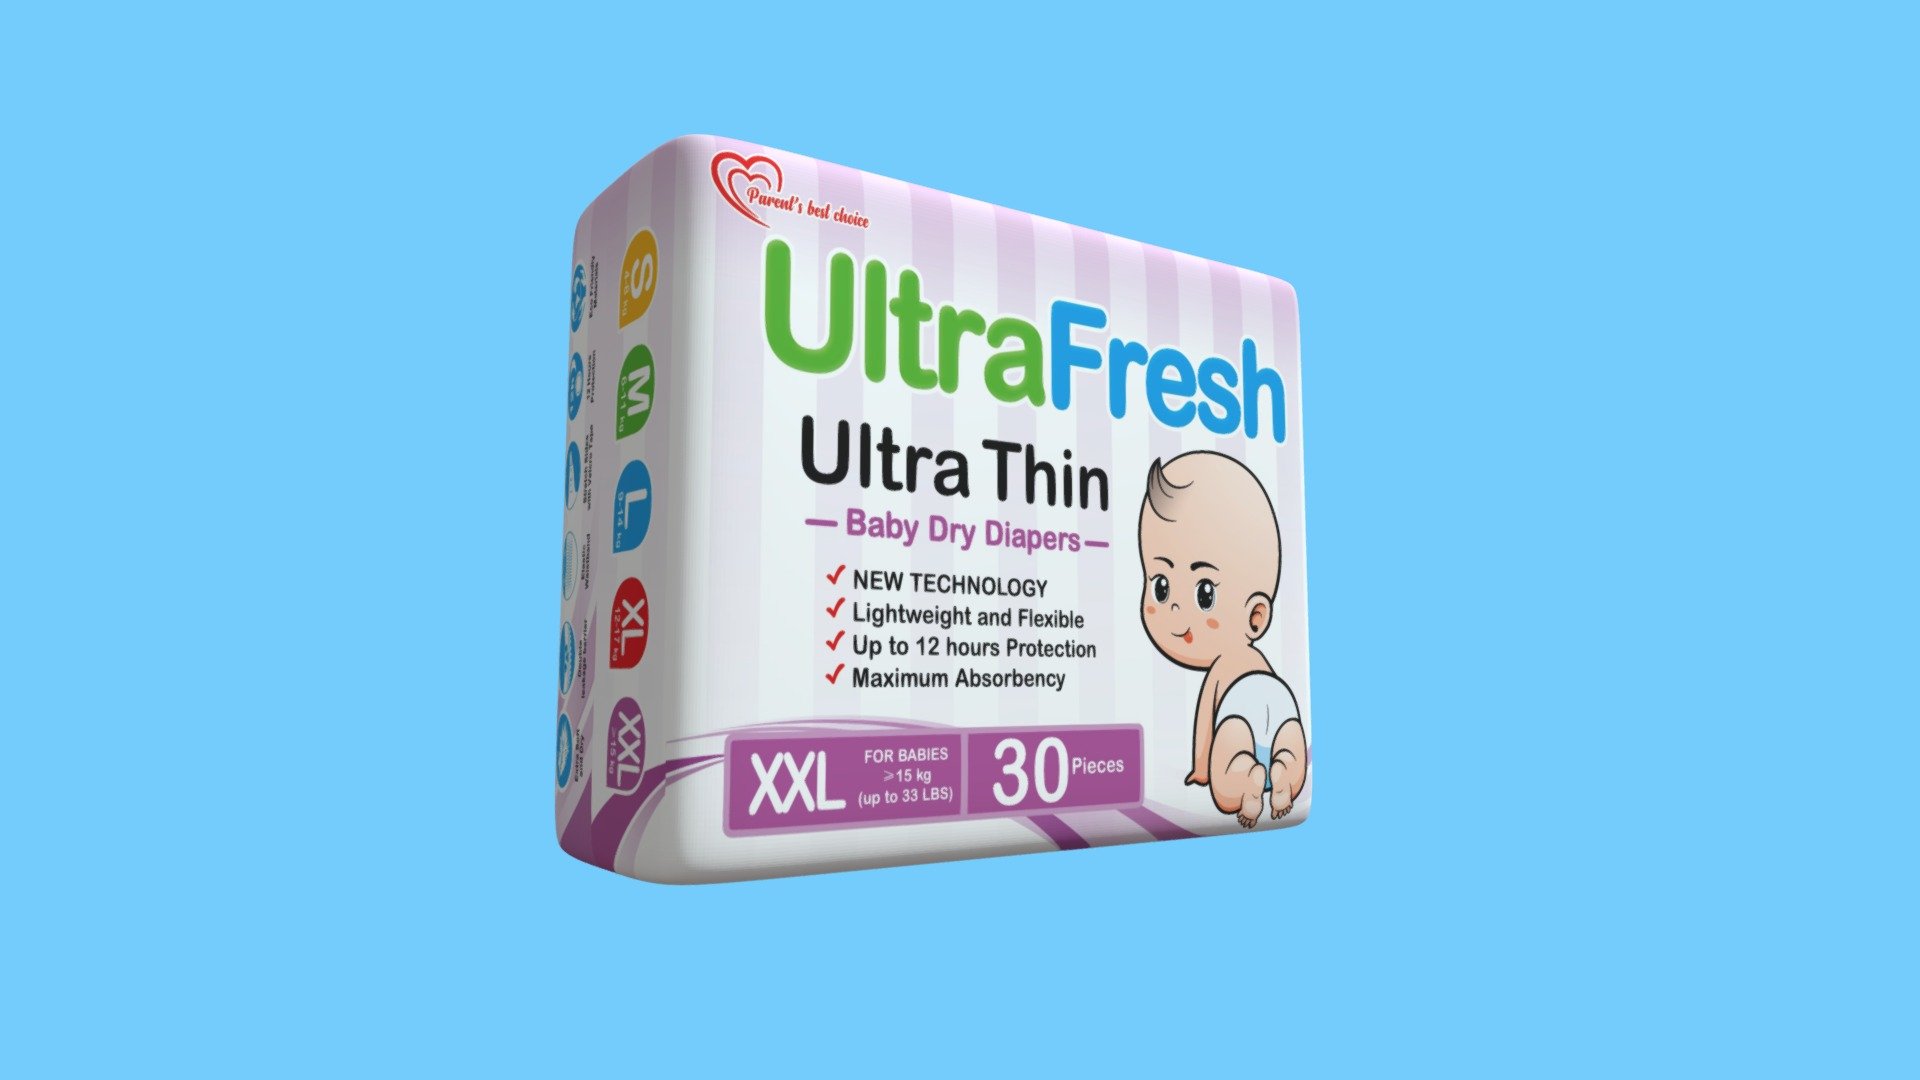 ULTRAFRESH Ultra Thin Diaper Features

PREMIUM FABRIC Diaper that breathes and  your Baby barely feels it.

ULTRAFRESH is NOT JUST YOUR ORDINARY diaper.




New Technology
    2mm Ultra thin which means half thick as traditional diapers.

    Lightweight and Flexible to accommodate your baby's free movements 
    Enlarged elasticized waistband with additional stretchy side for a better snug fit for active babies. 
    No bulge nor sagging when full. 
    Minimum bulk for babies between legs
    Less shelf space at home or everywhere!
    Perfect for tropical weather

Performance
    High Absorption capacity suitable for day and night use 
    Restricting the liquid back through in the reverse direction (wet-back)
    Rapid acting Dryness that keeps moisture away from baby’s skin helping to  prevent diaper rash.
    Re-attachable Velcro tape in any condition.
    Soft Materials that resemblance to a cotton underwear
 - XXLarge UltraFresh Ultra Thin Taped Diaper - Download Free 3D model by UltraFresh Ultra Thin Diaper (@Ultrafreshph) 3d model